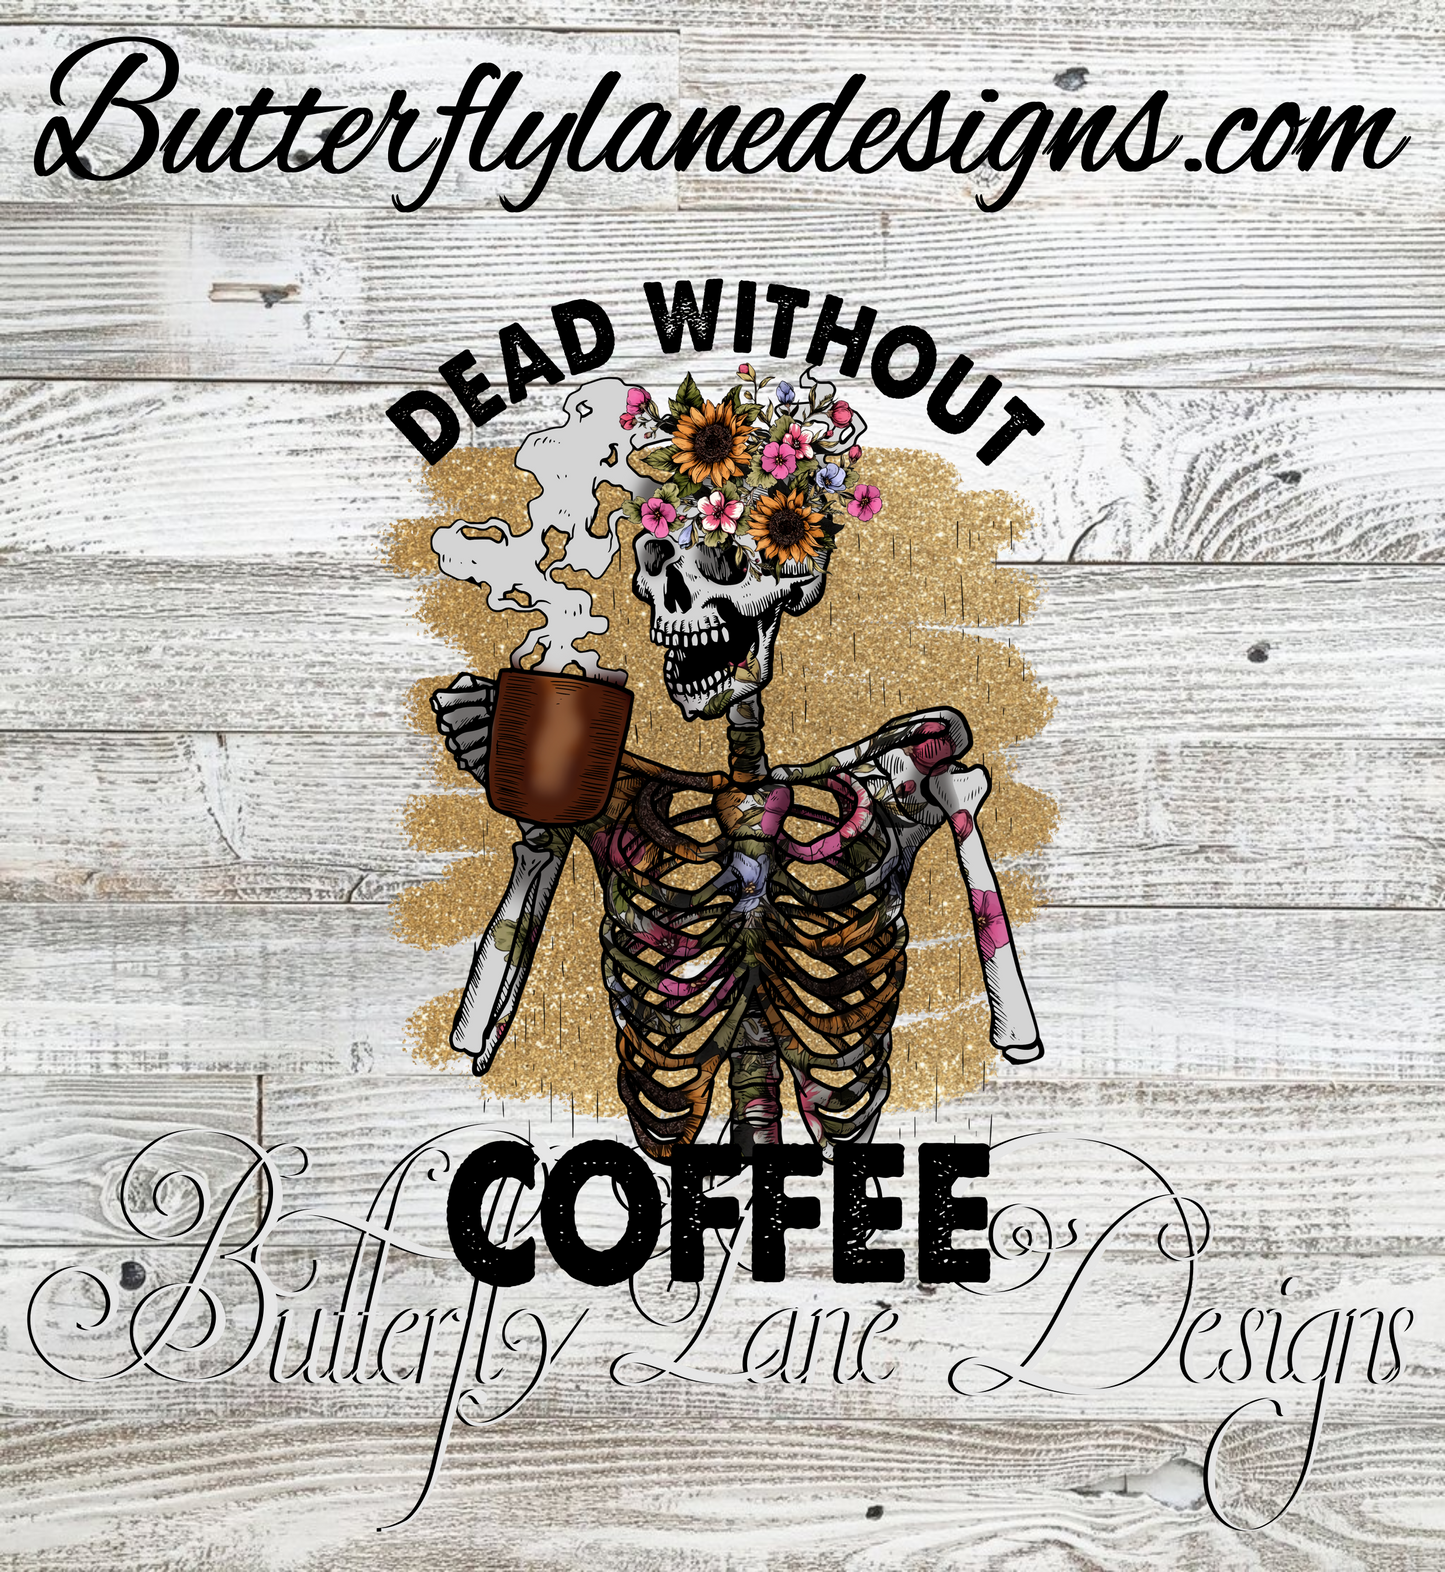 Dead without coffee :: Clear Decal or VCD